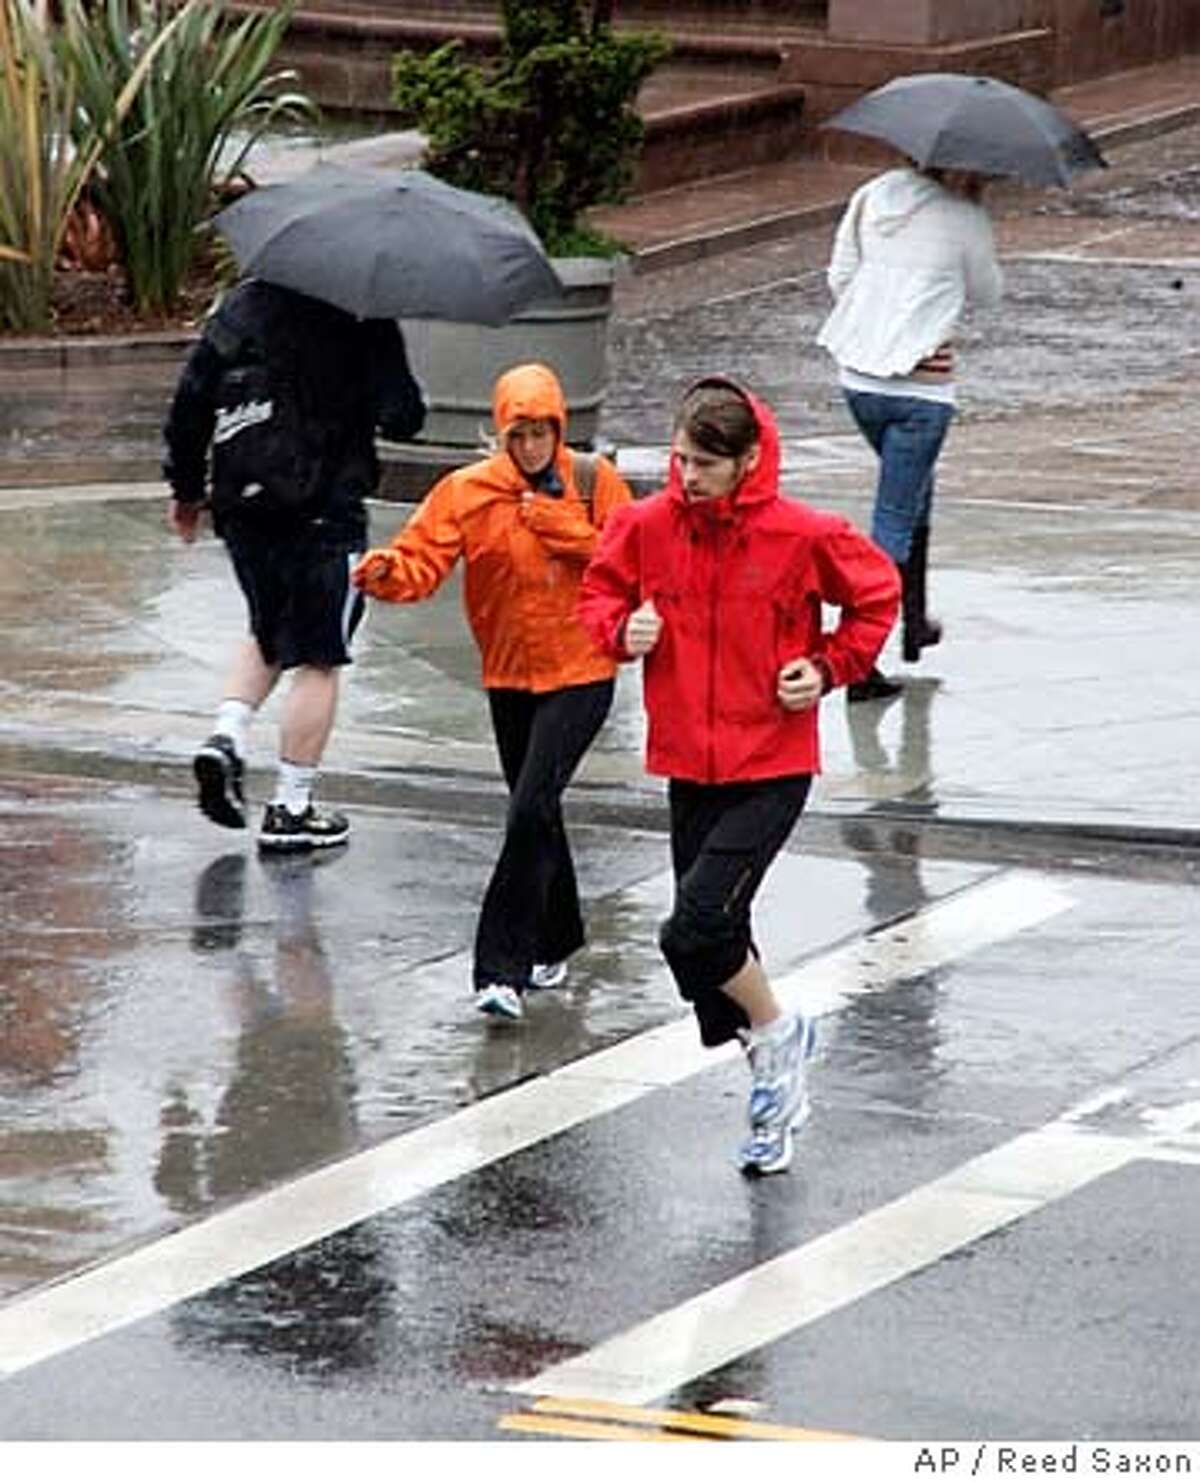 The few pedestrians out and about hurry through rain falling on the Third Street Promenade in Santa Monica, Calif., Friday, April 20, 2007. (AP Photo/Reed Saxon)